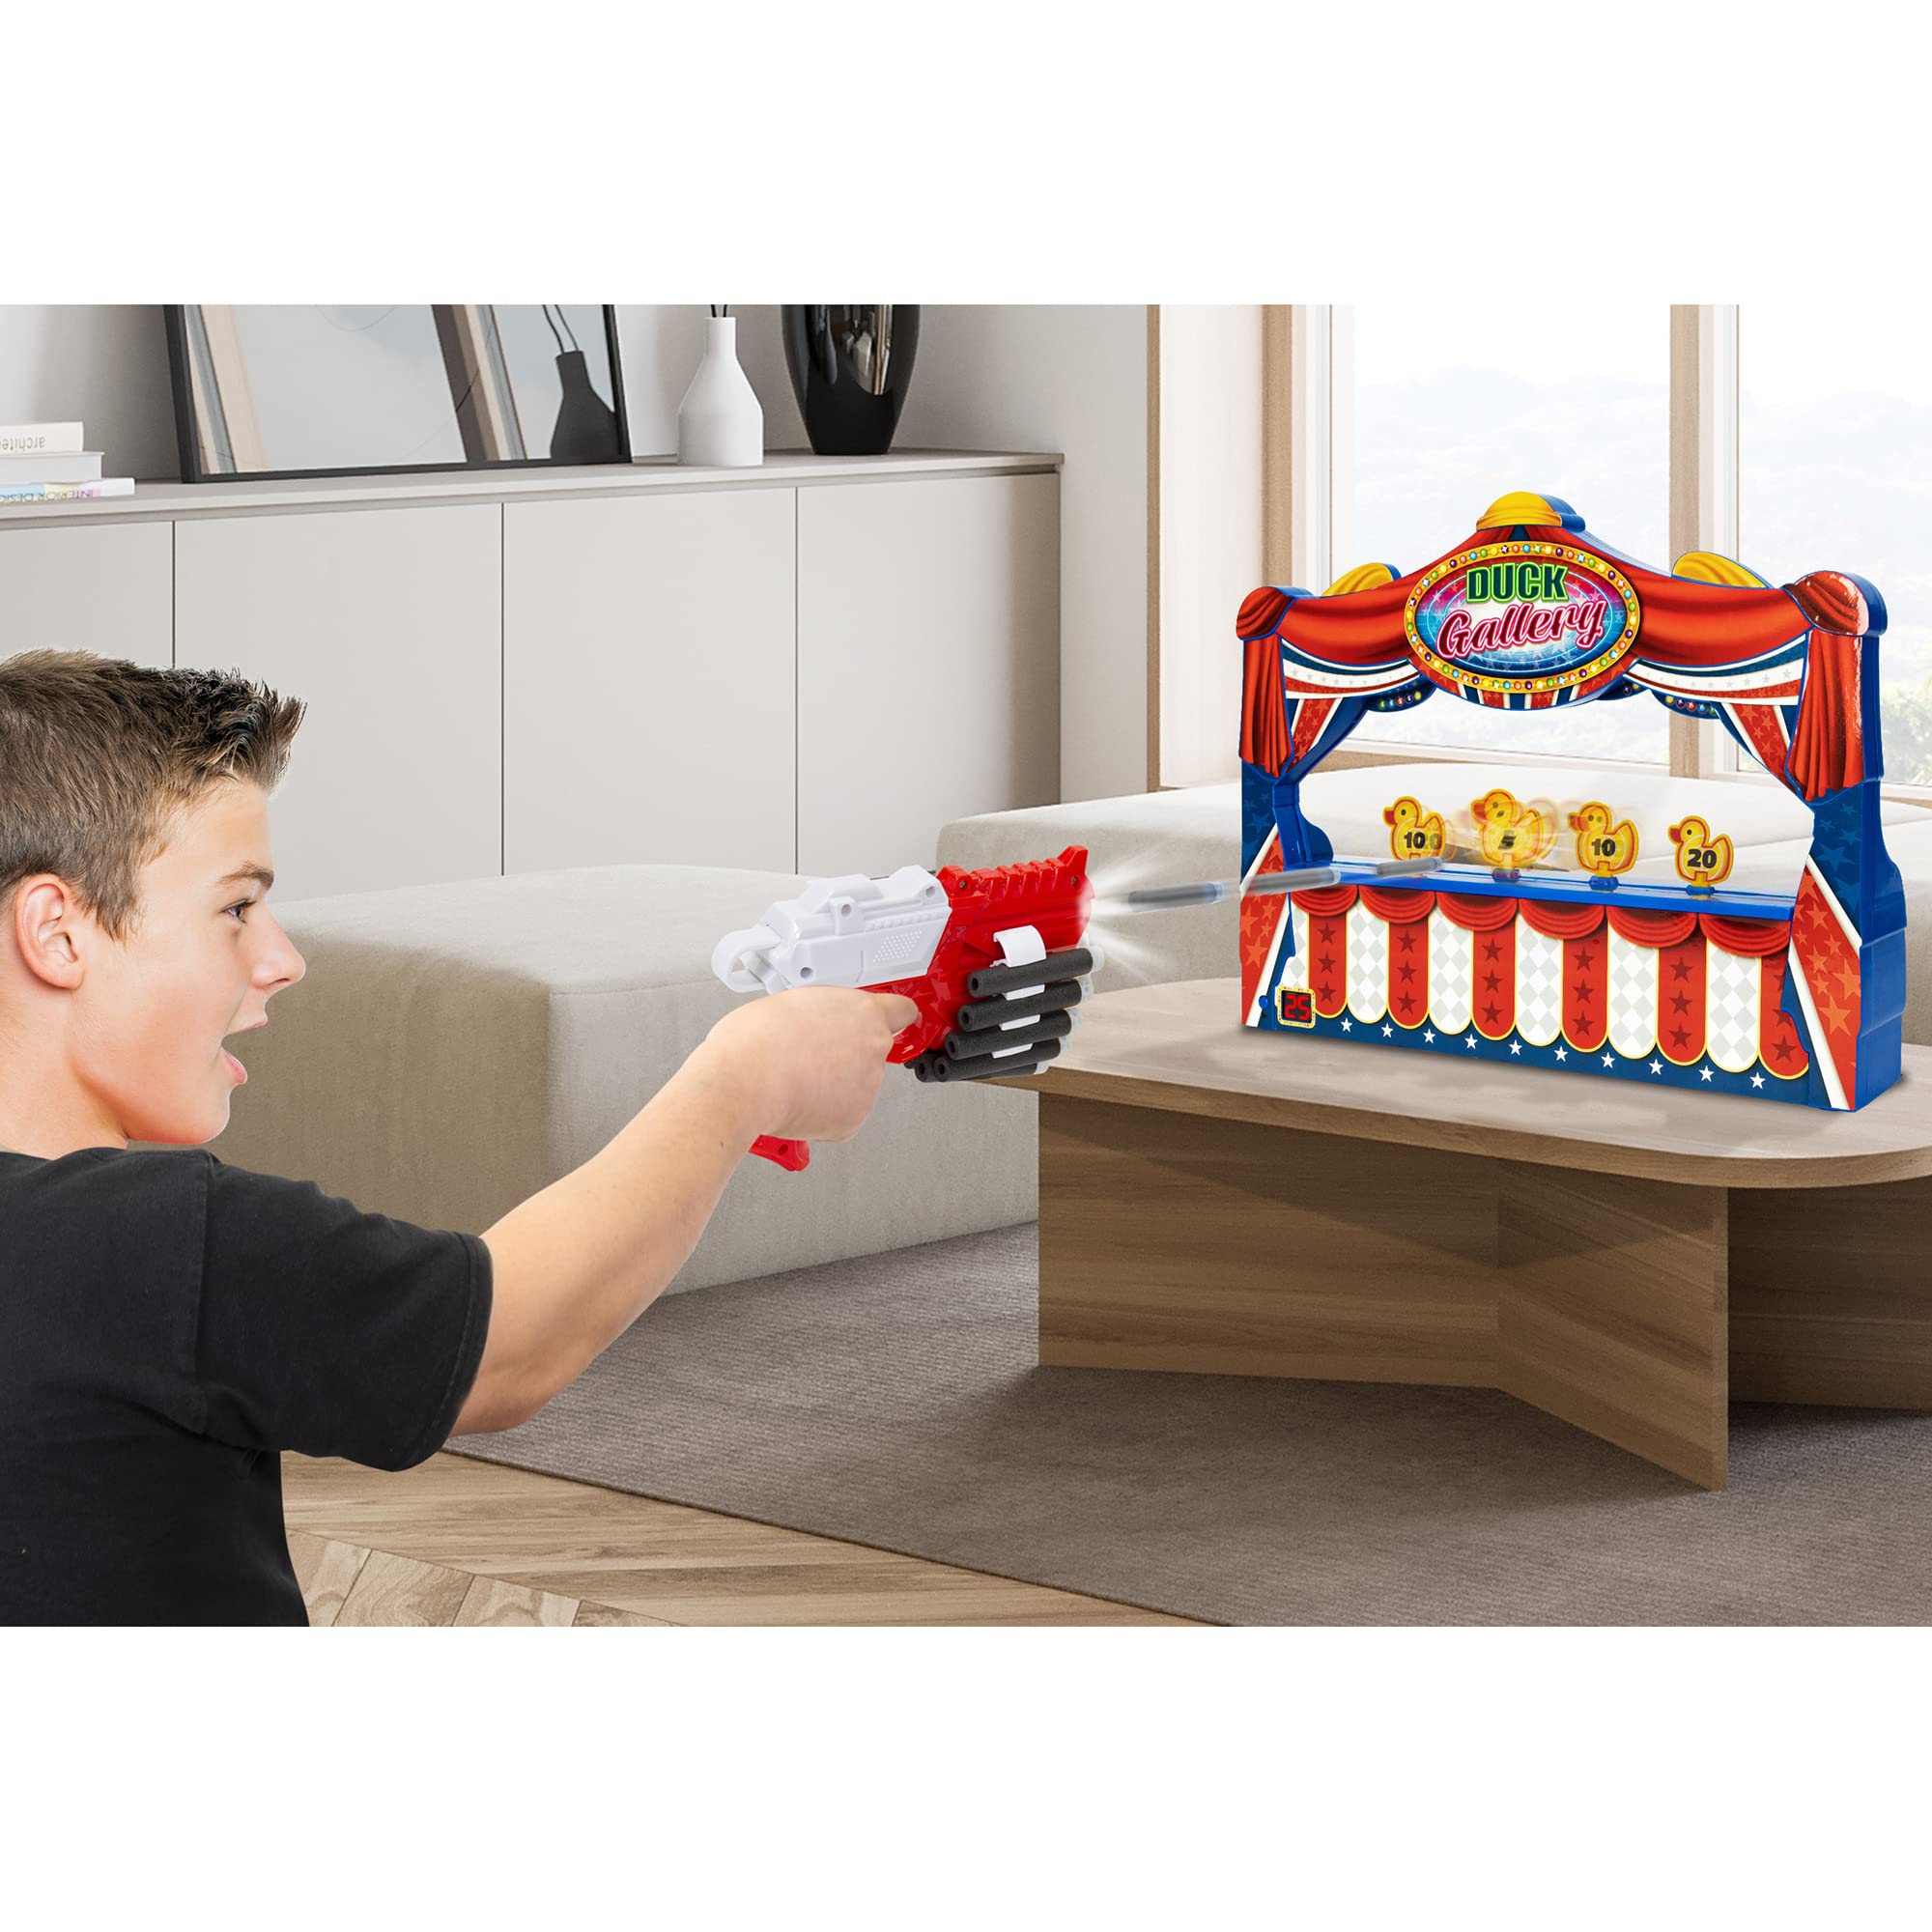 Retro Arcade Electronic: Duck Shooting Gallery - Tabletop Game with Blaster Gun, Moving Ducks & Sound Effects, Ages 6+